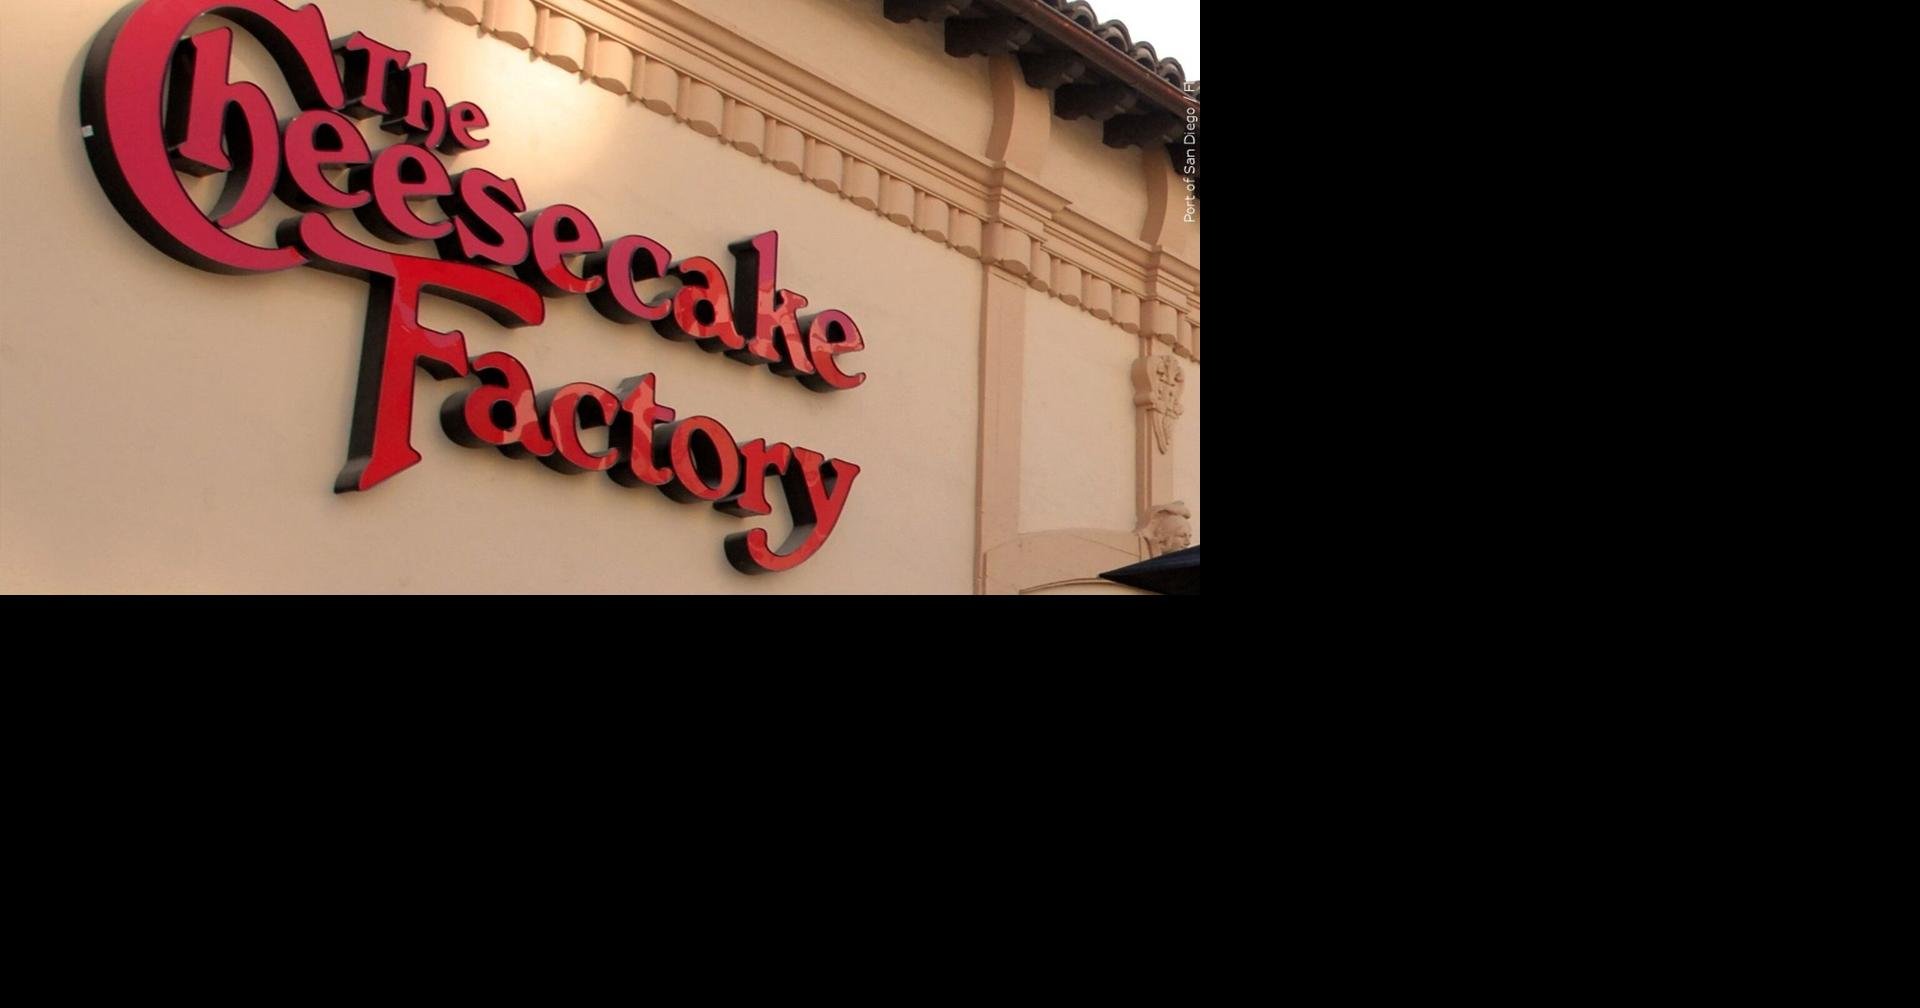 Cheesecake Factory, The at Fashion Valley - A Shopping Center in